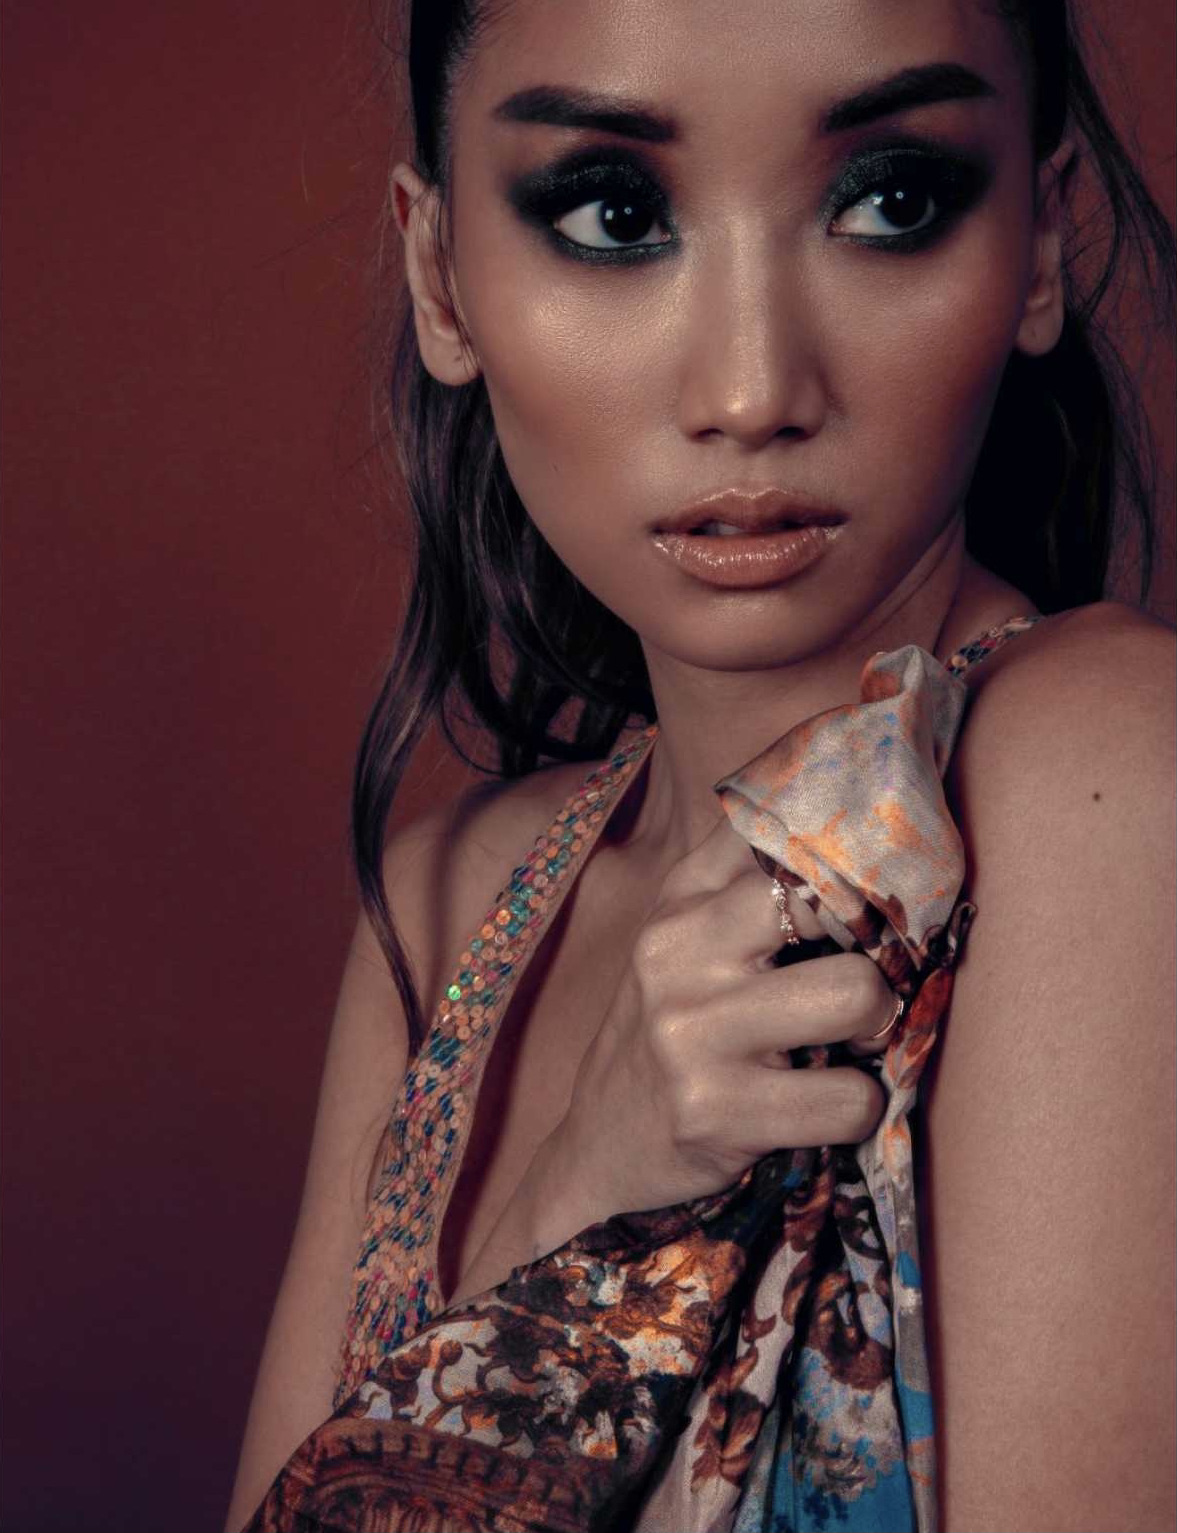 Happy birthday to the incredibly talented and beautiful Brenda Song 